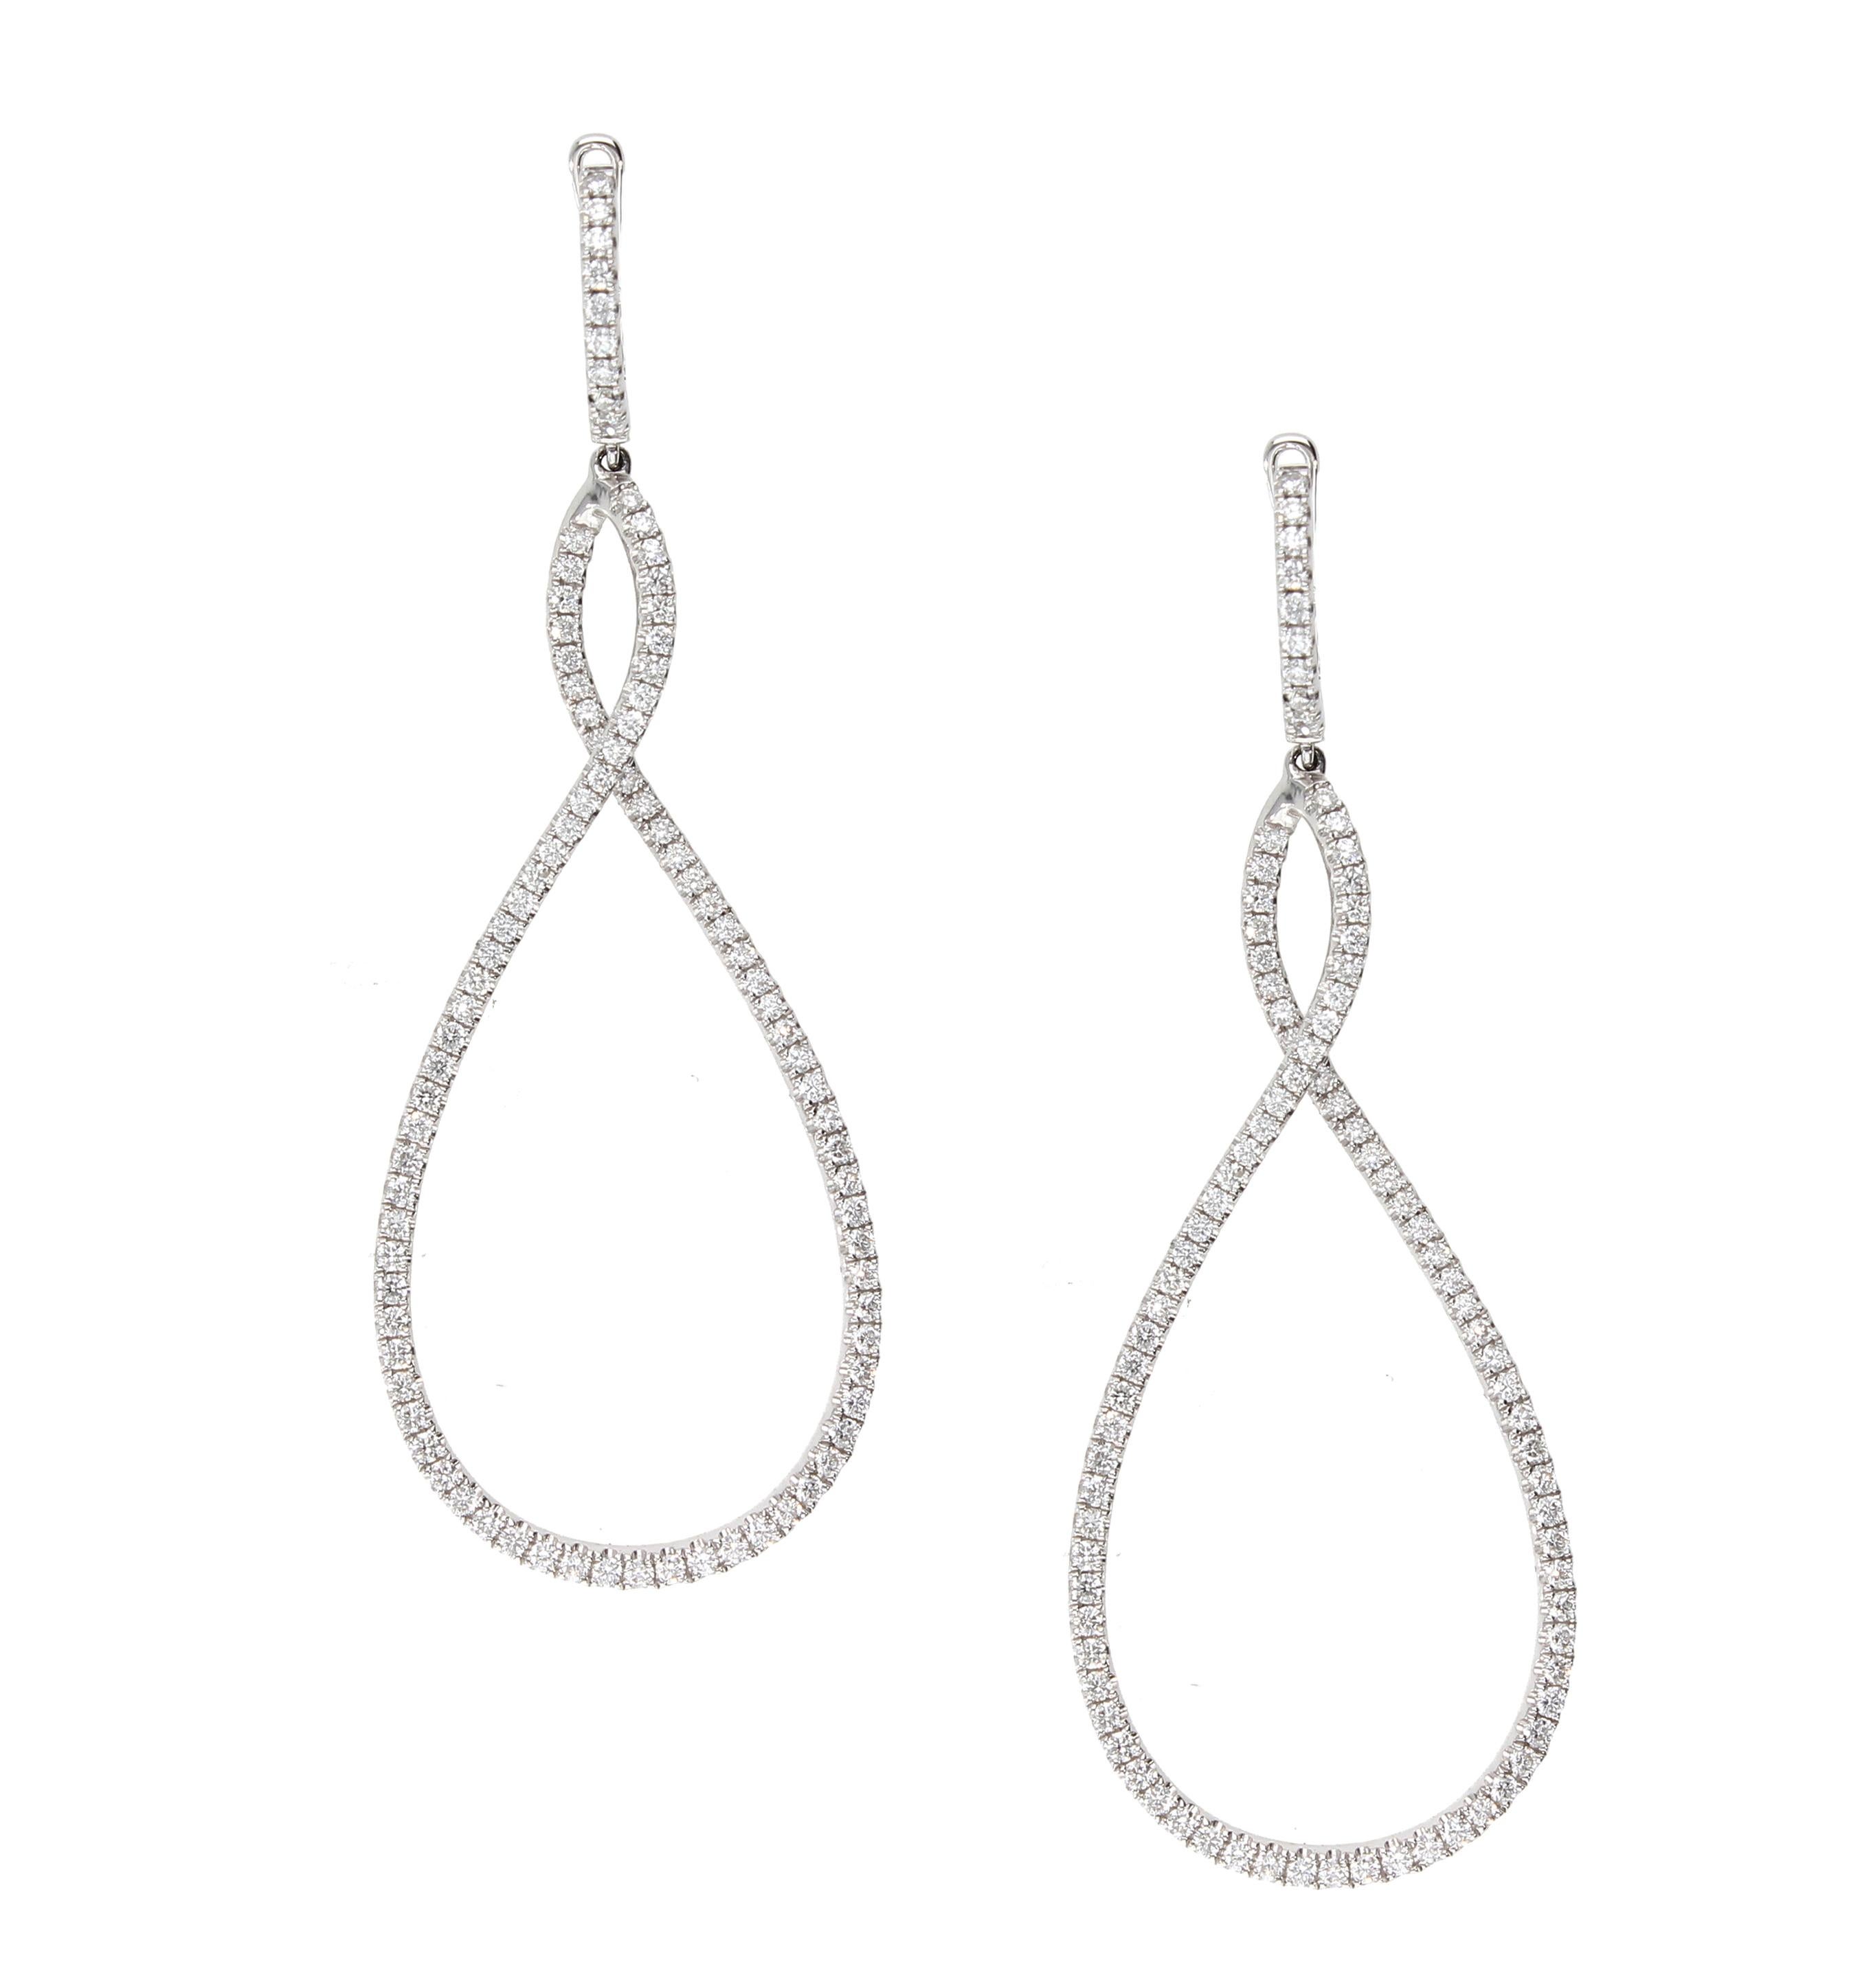 The elliptical model earrings, are made up of a row of 182 brilliant-cut diamond, for a total carat weight of 1.43 carats.
The earrings are formed by a row of diamonds that cross in a helical shape. 
The upper part of the earrings is in a